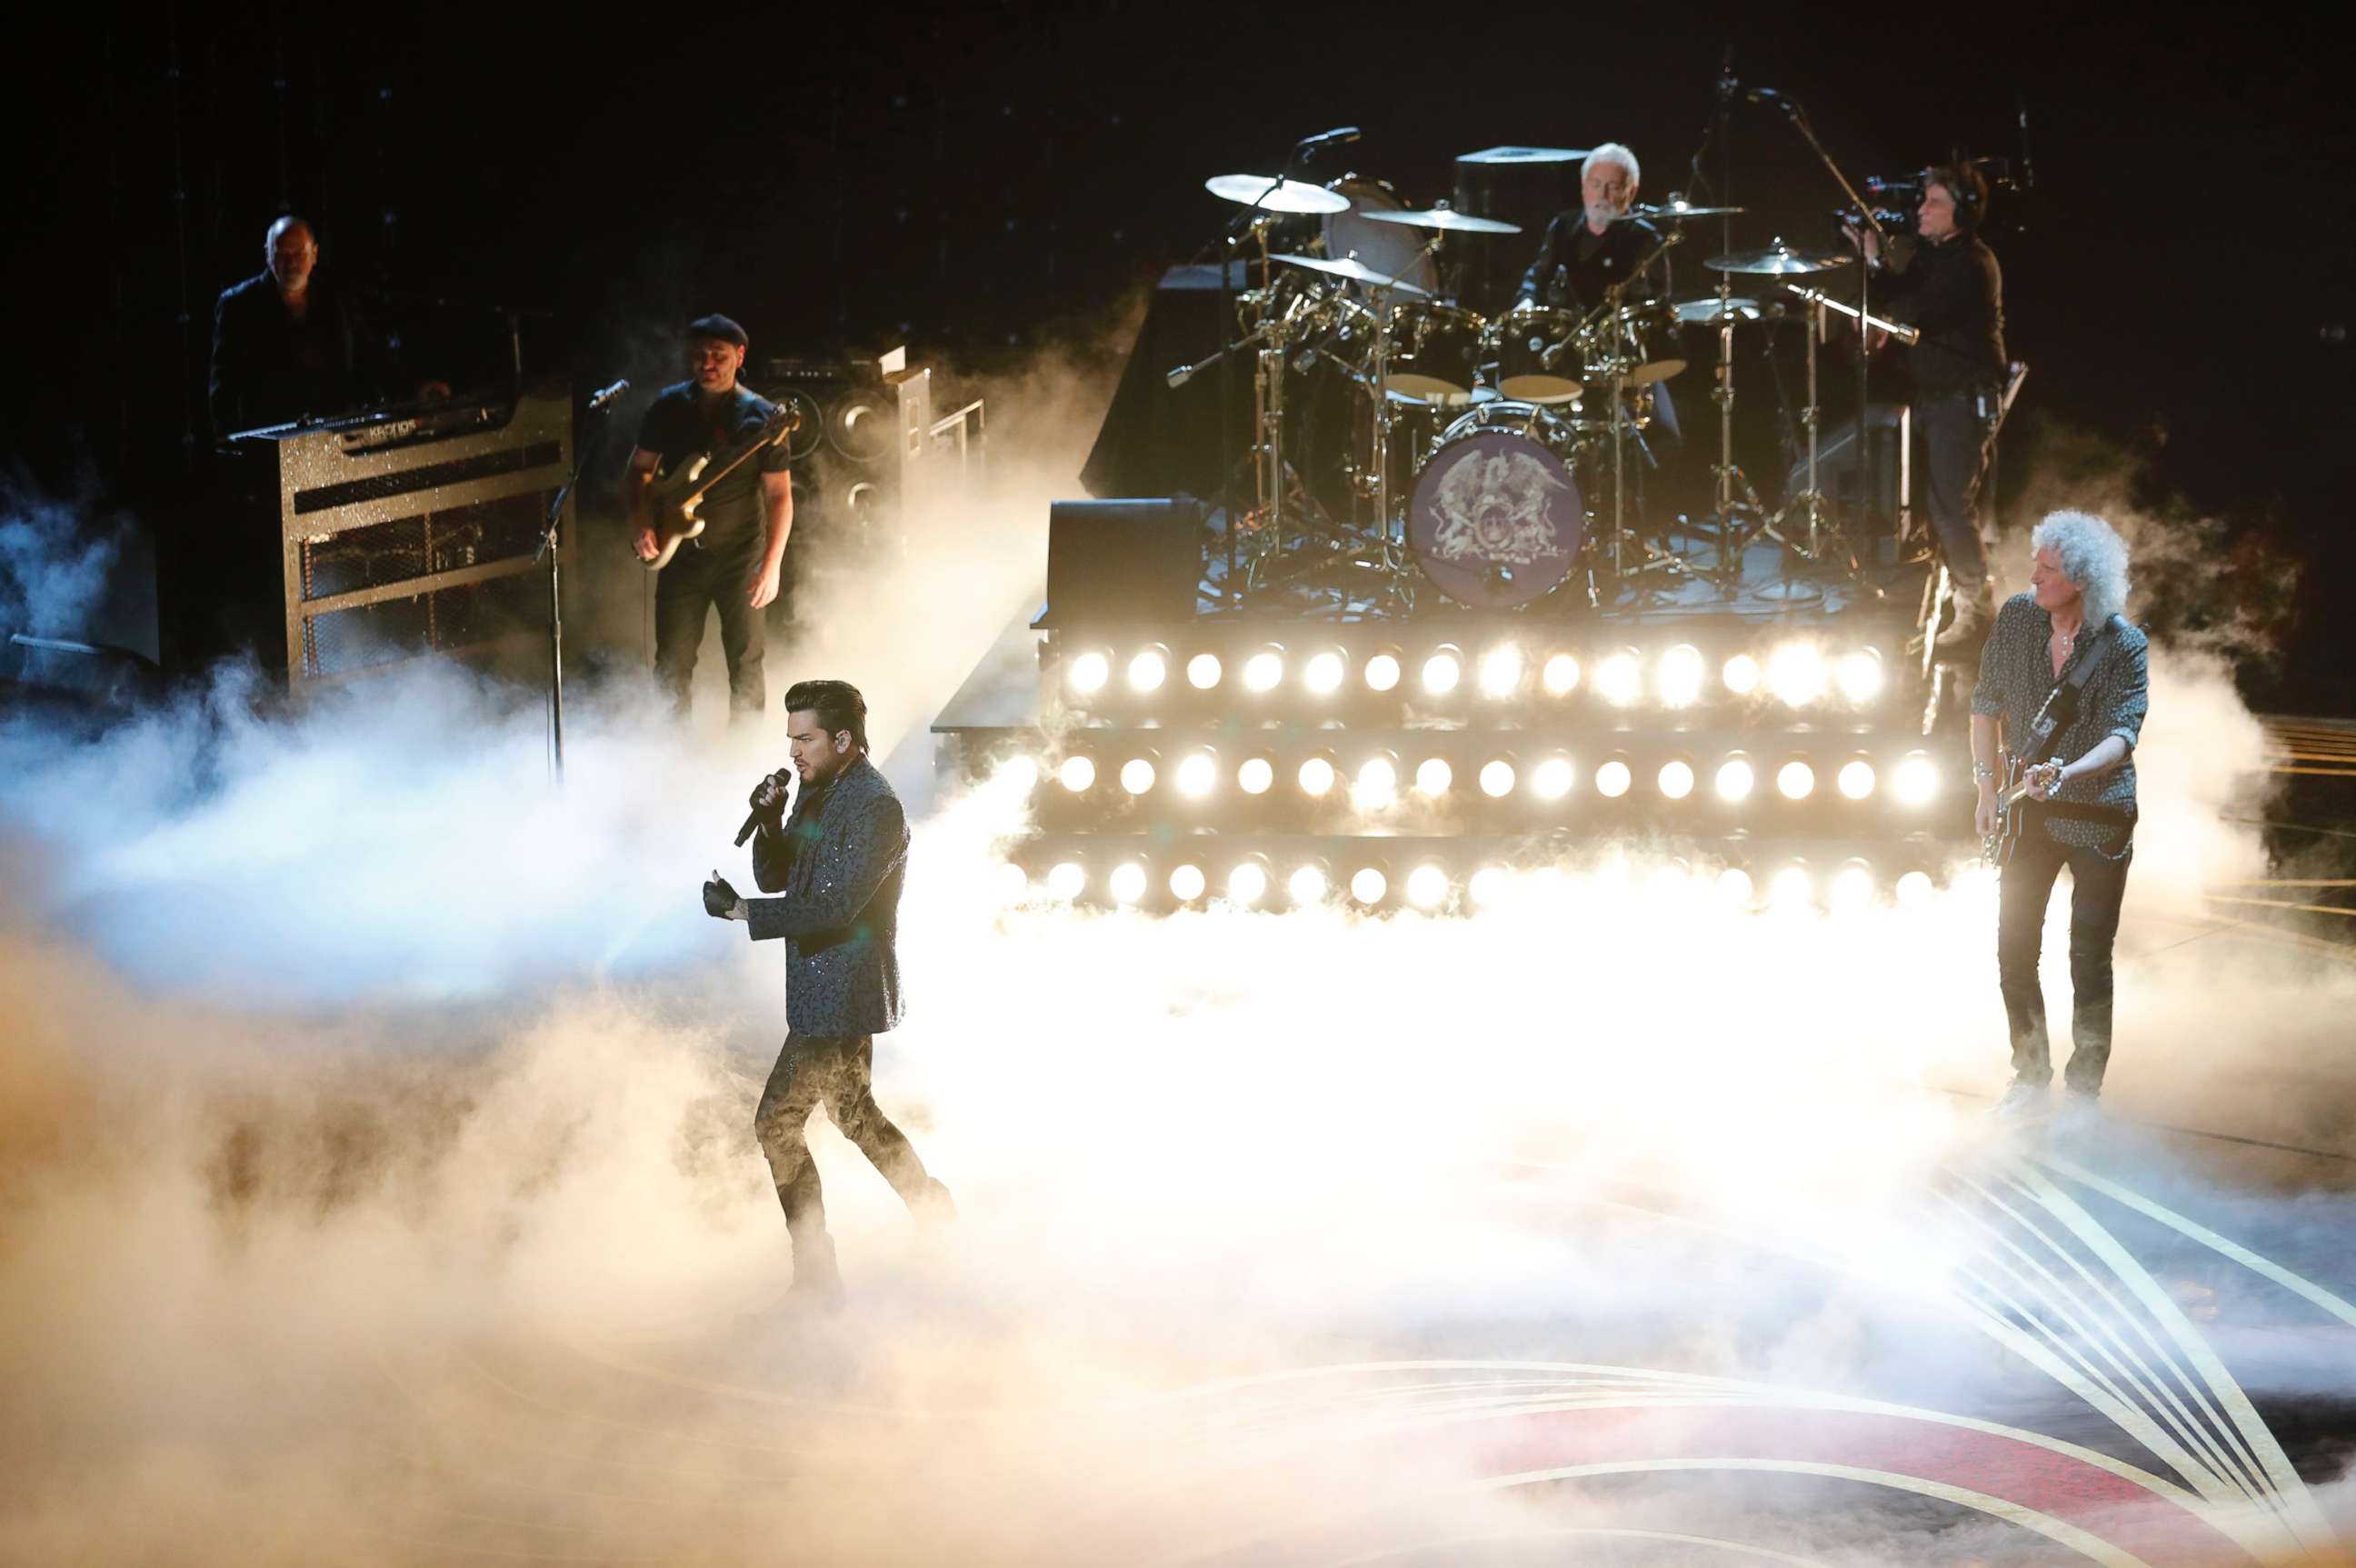 PHOTO: Adam Lambert performs with Queen at the Oscars, Feb. 24, 2019 in Los Angeles.